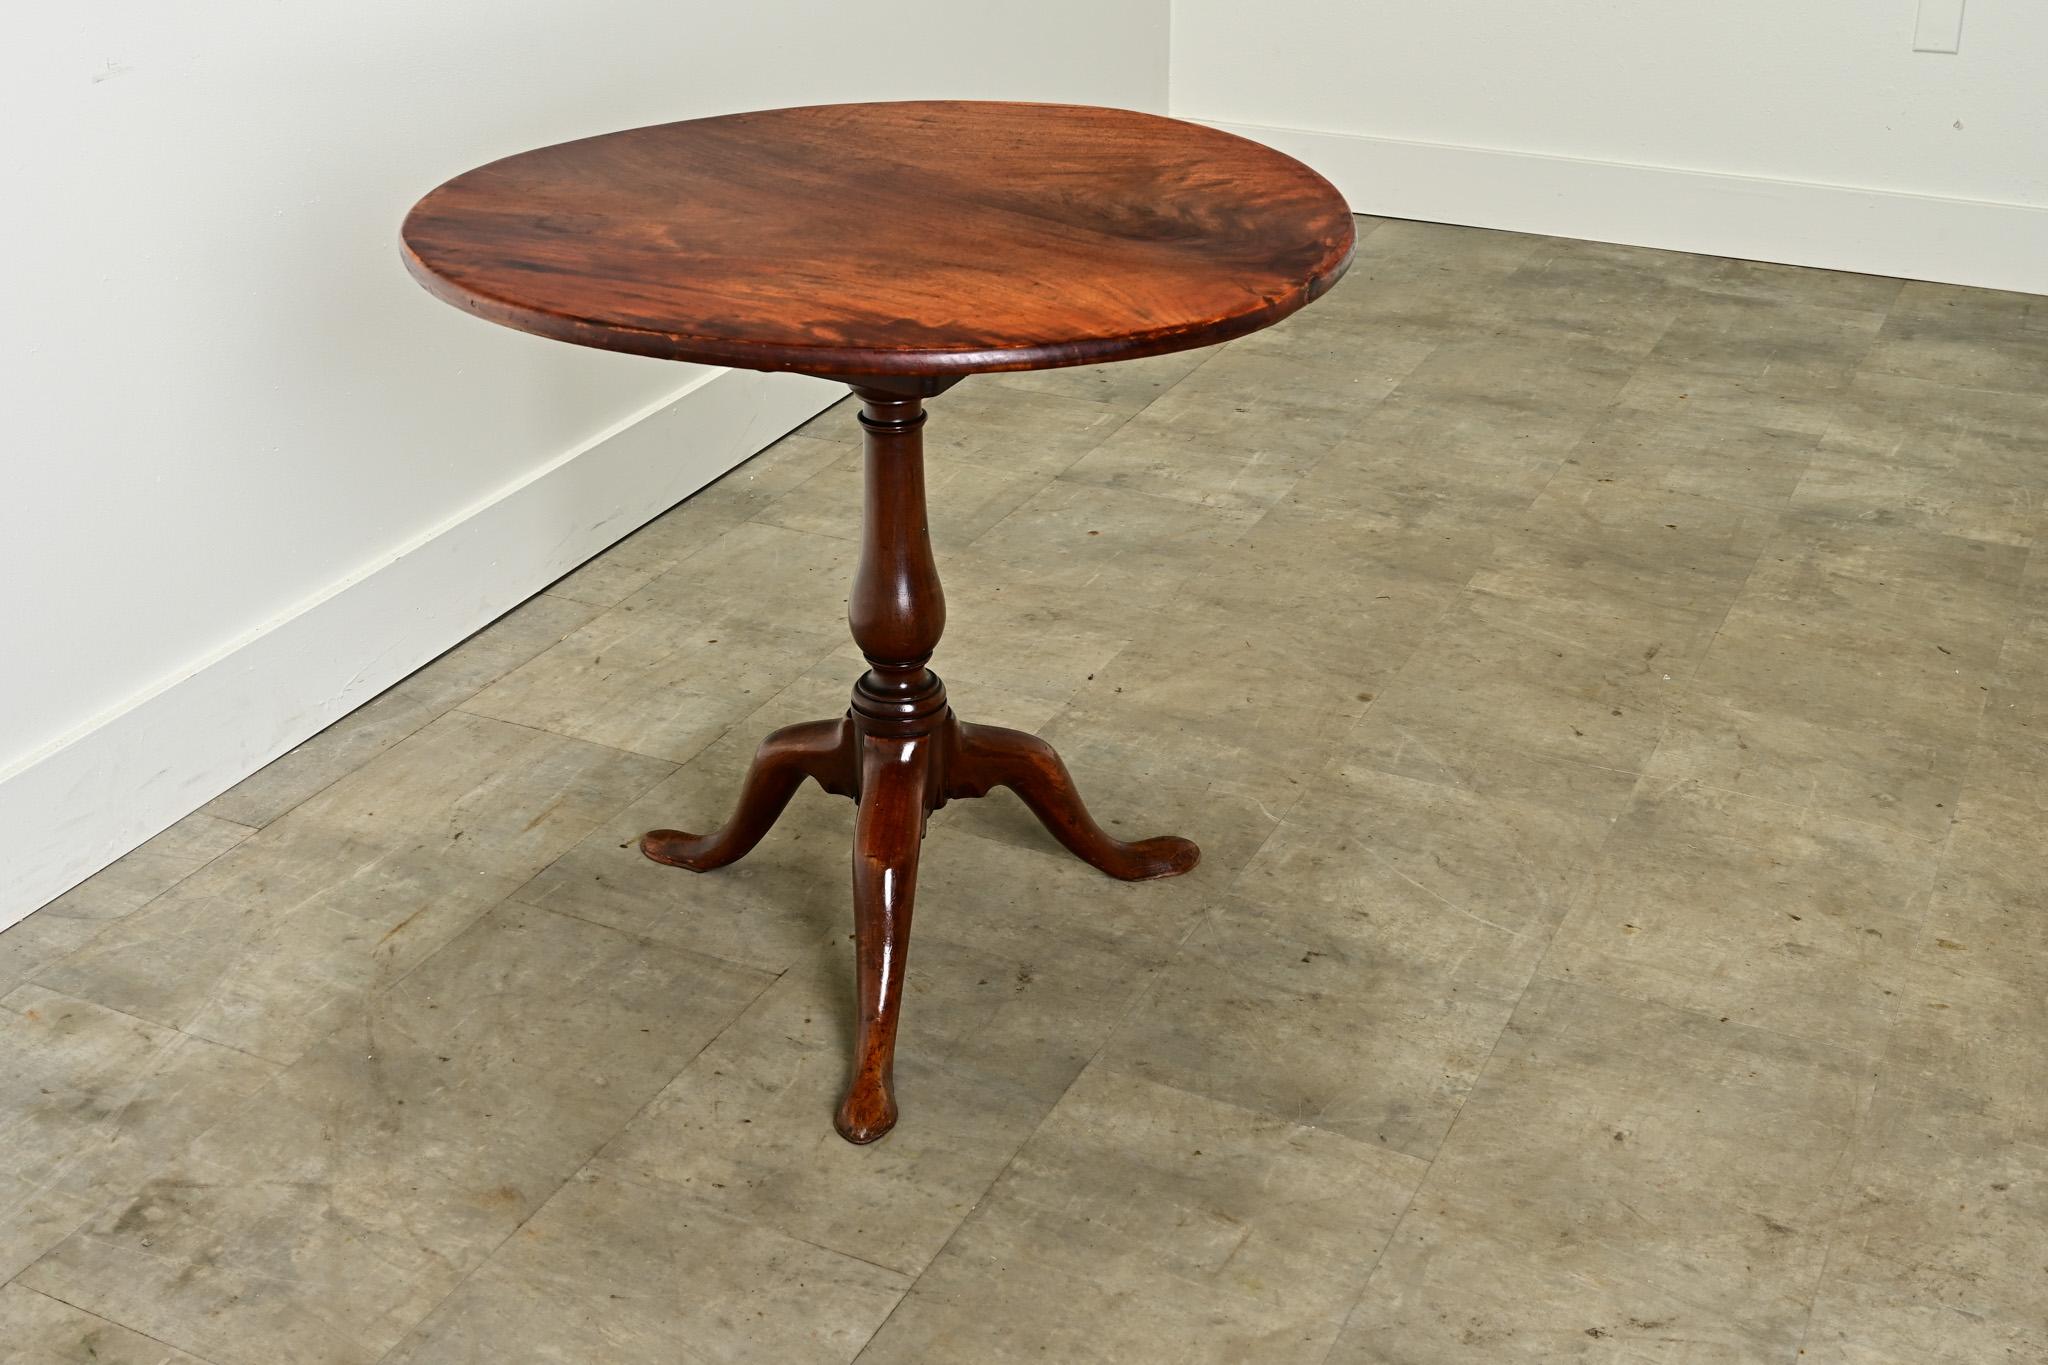 An English round tilt top table with a rare spinning top. The top is made from a single board of solid mahogany which has warped slightly over time. Below the table top you’ll find a metal catch and hinges used for latching and tilting the top, and